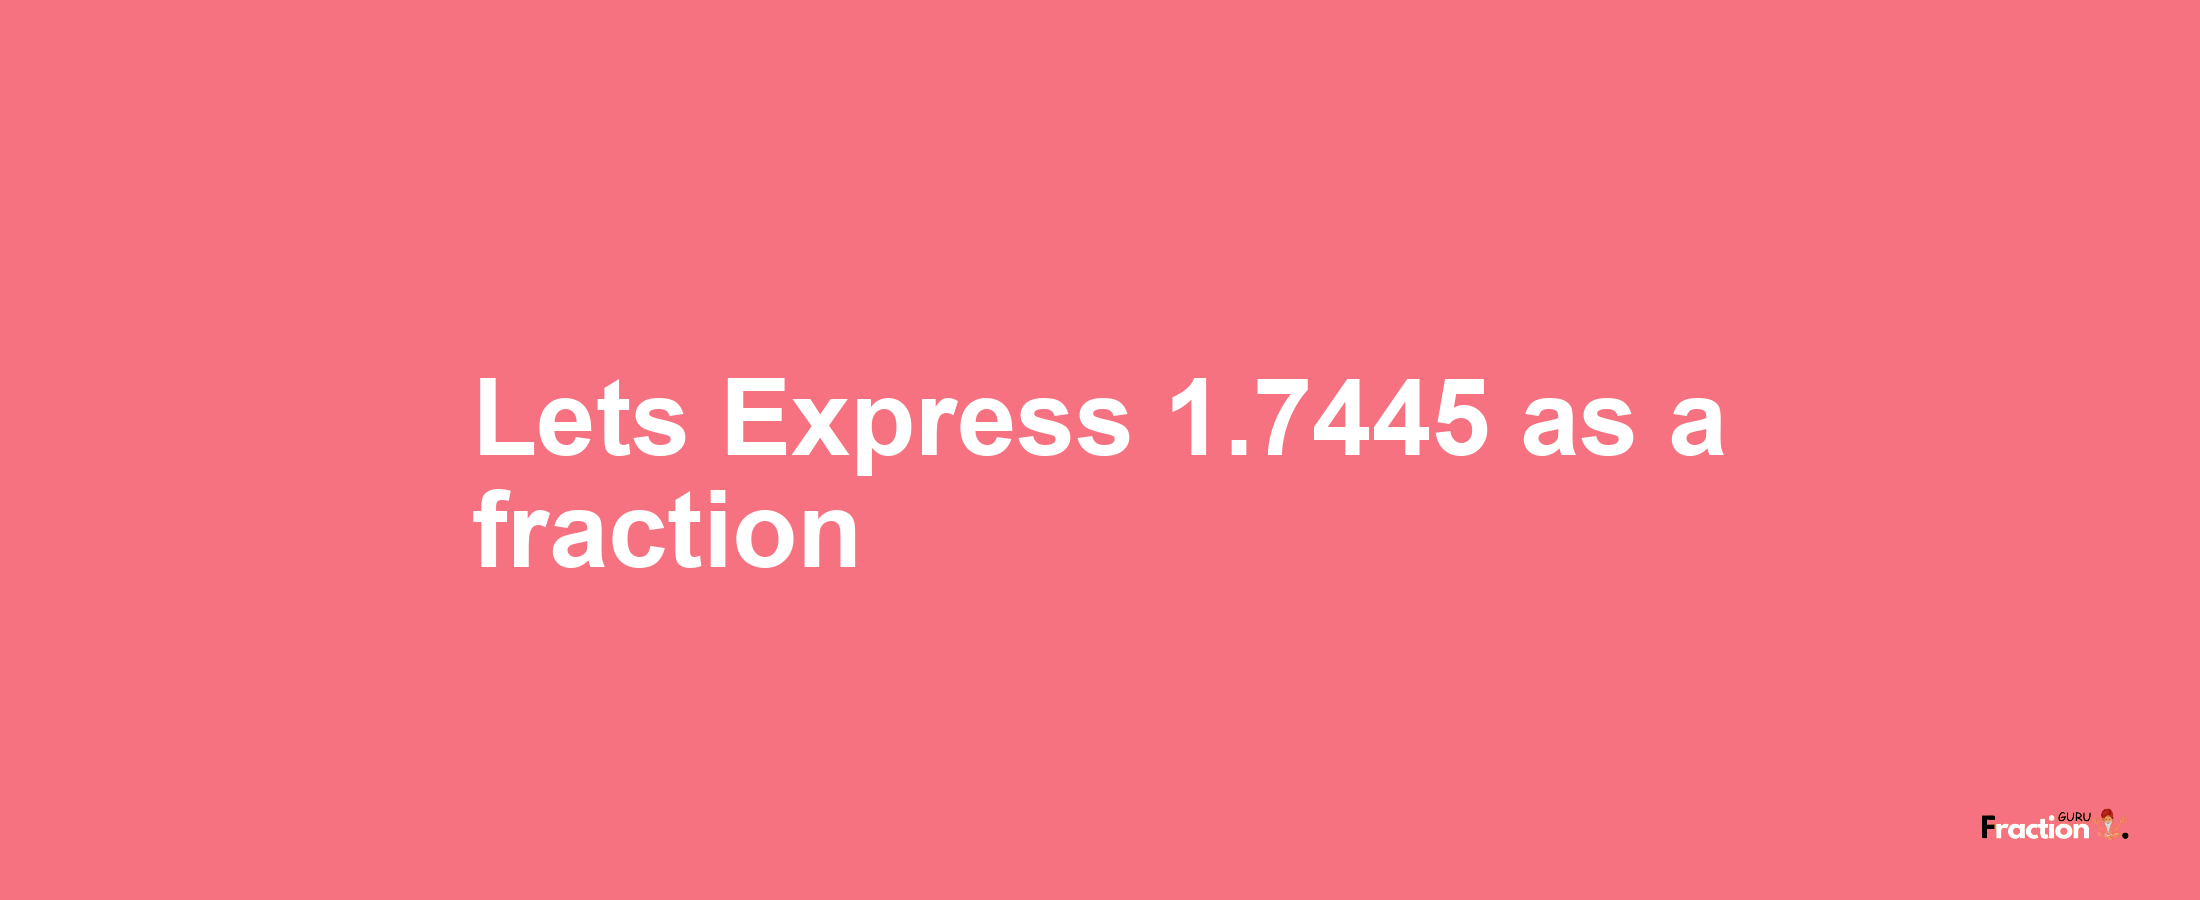 Lets Express 1.7445 as afraction